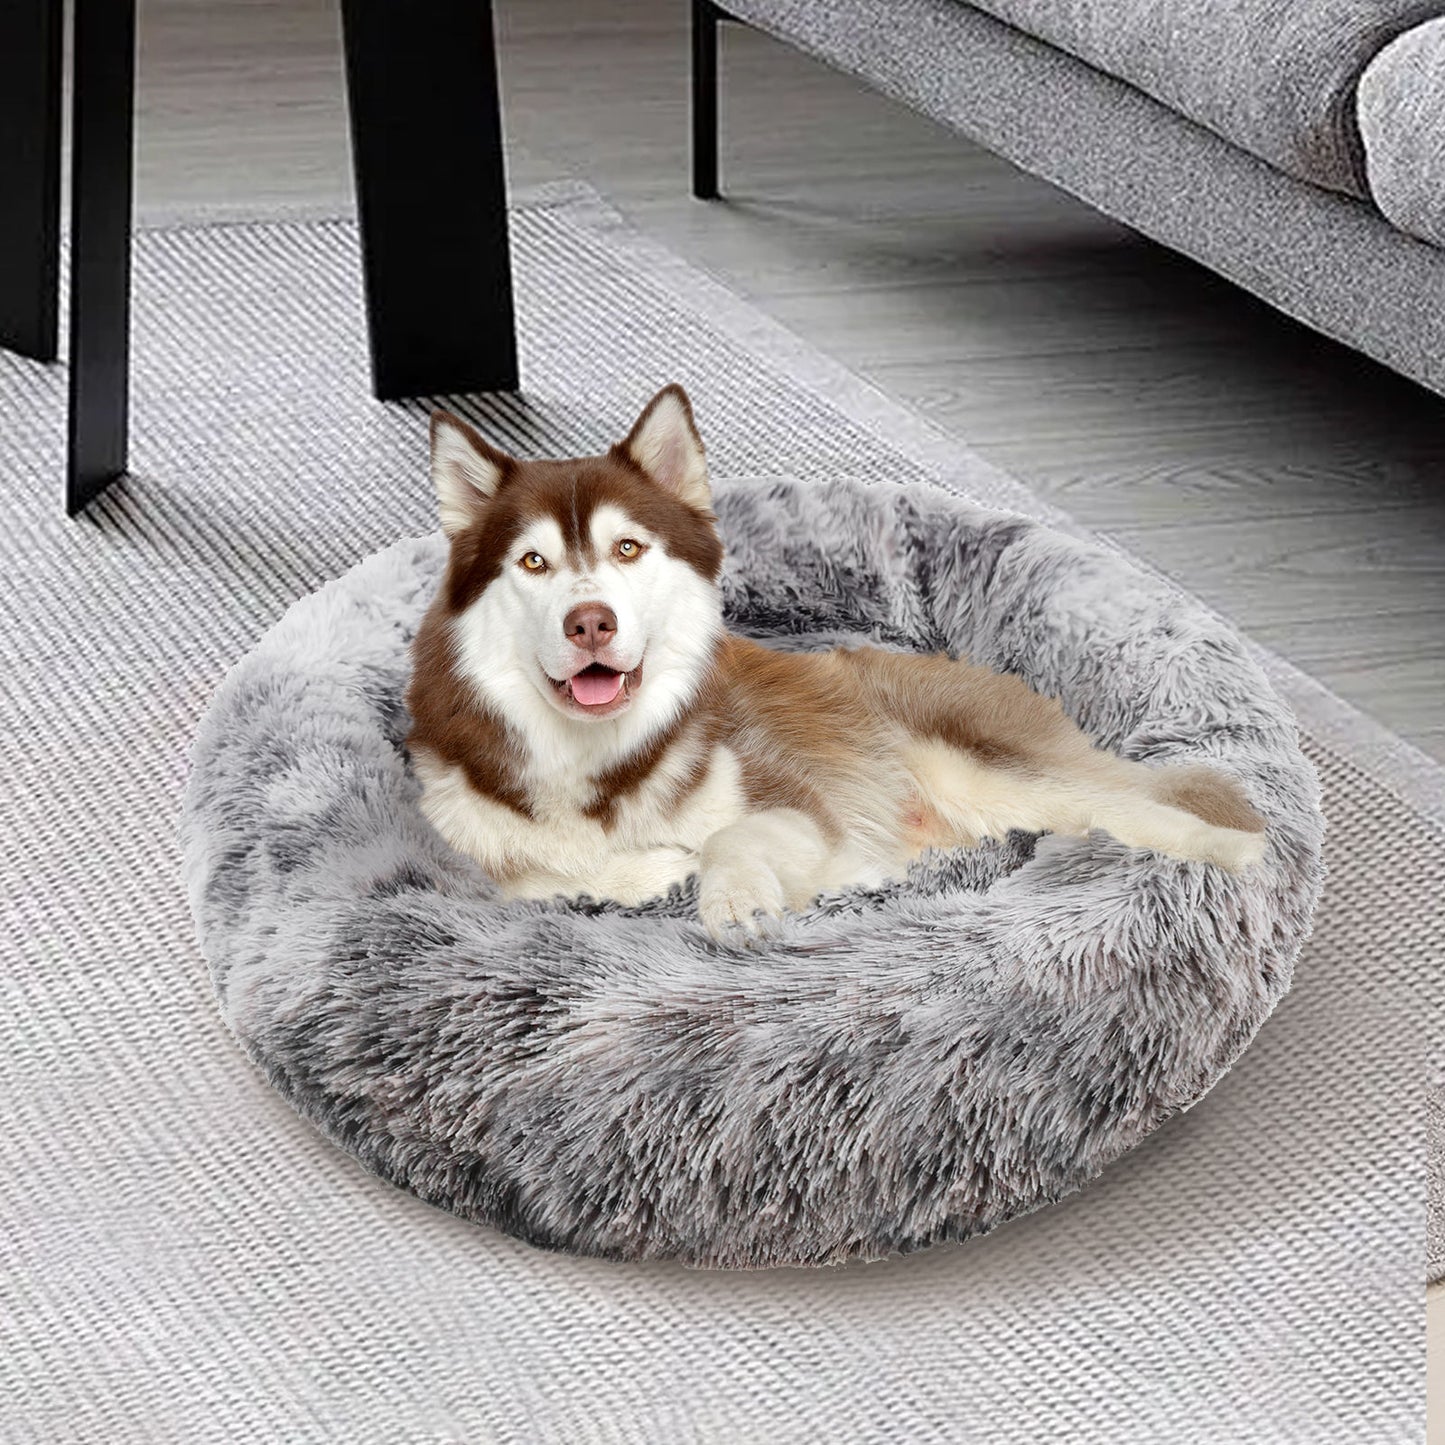 Pawfriends Dog Cat Pet Calming Bed Washable ZIPPER Cover Warm Soft Plush Round Sleeping 70